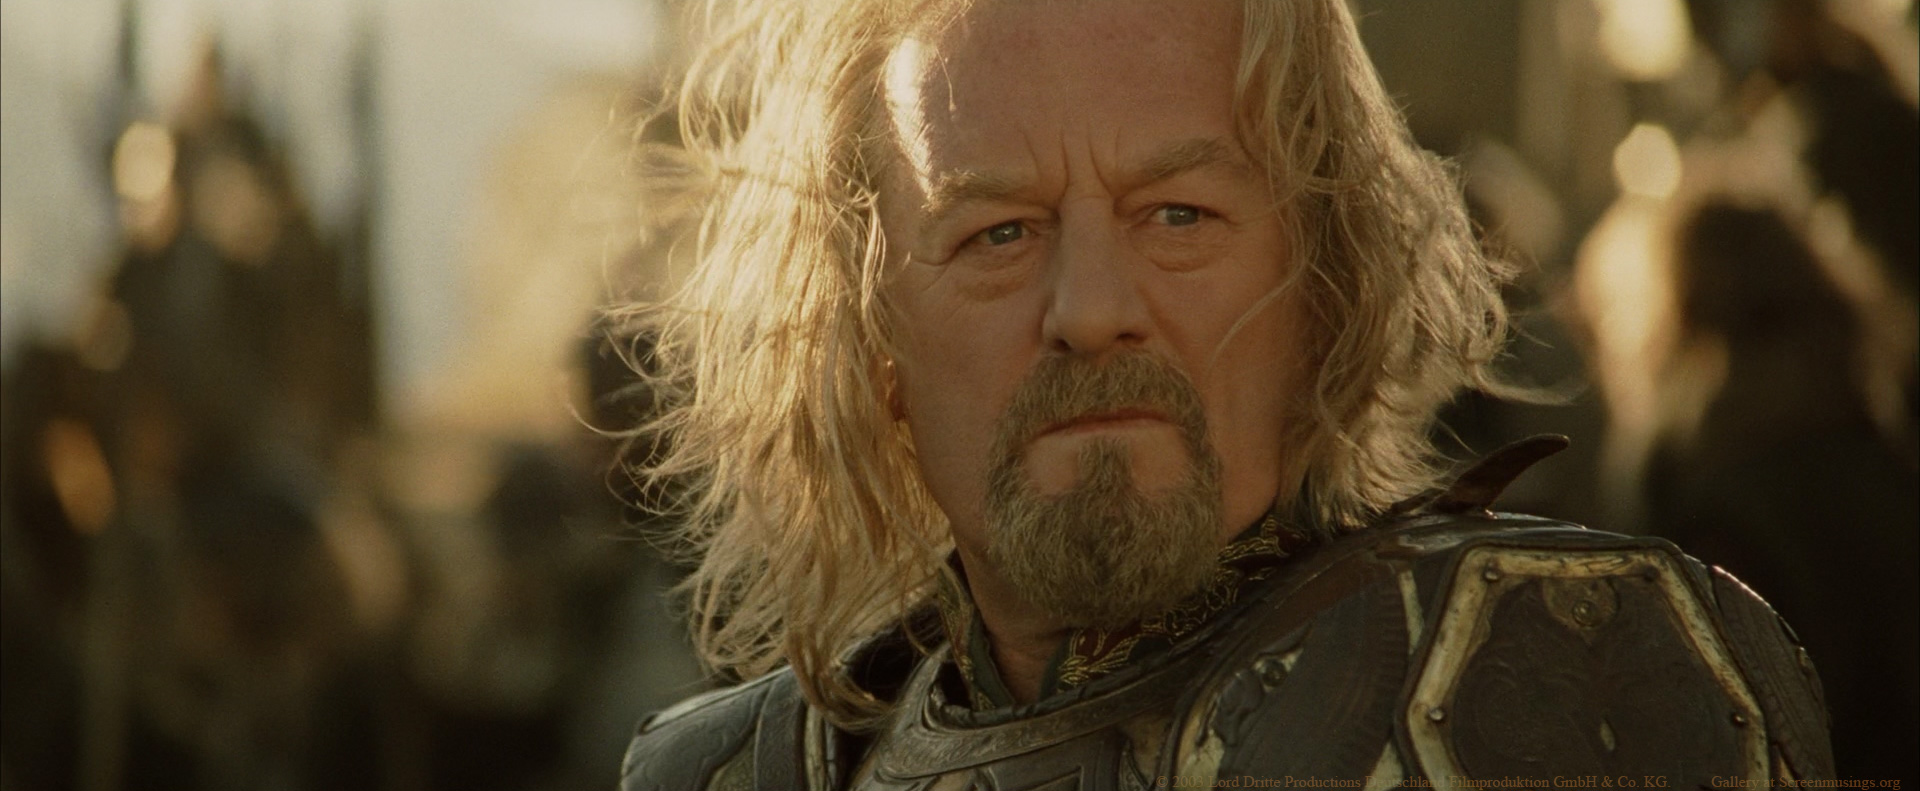 Bernard Hill in The Lord of the Rings: The Return of the King